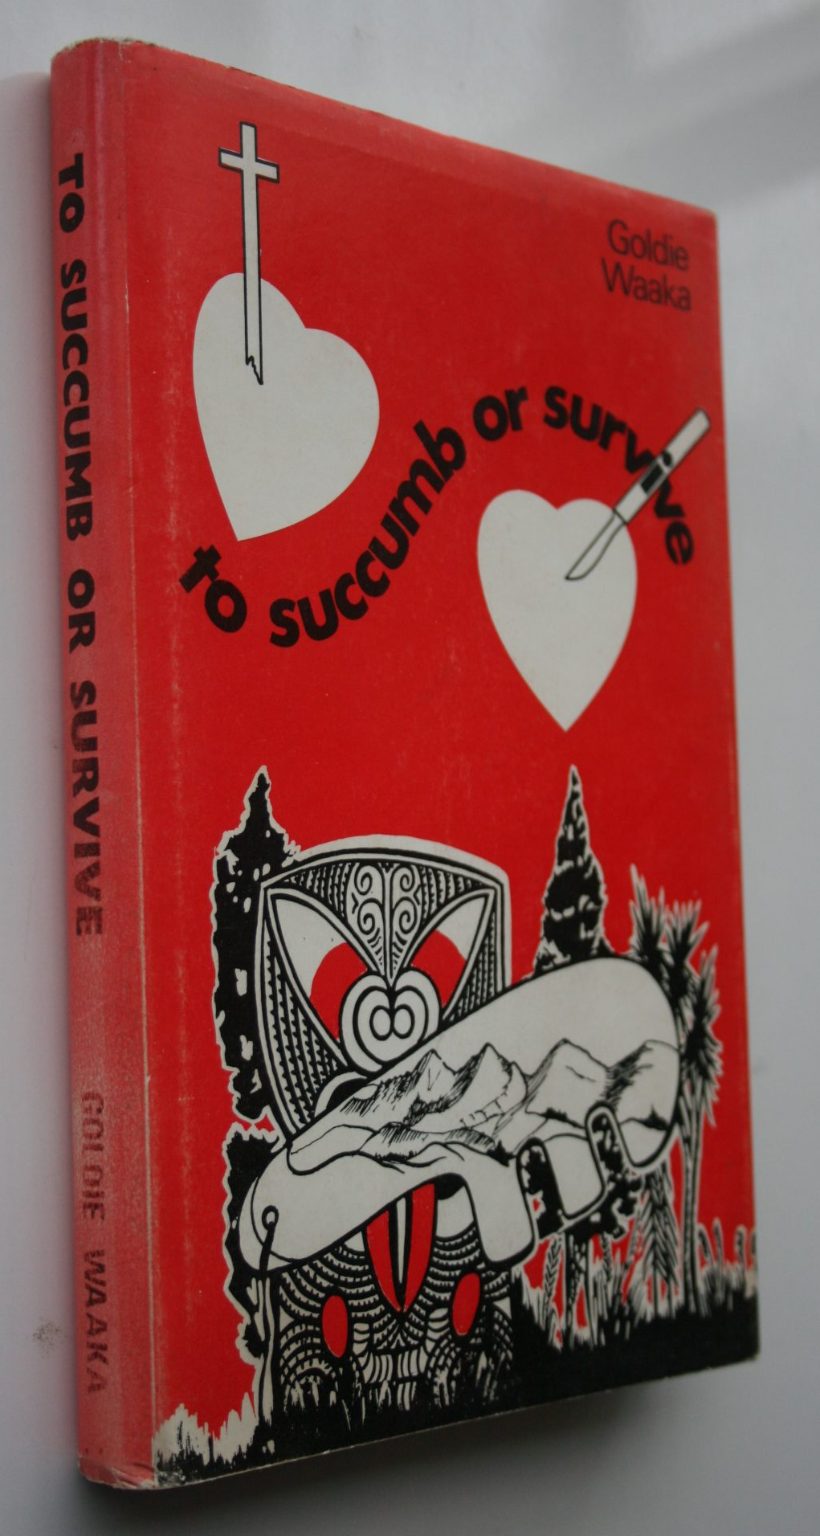 To Succumb Or Survive by Goldie Waaka. 1977, First Edition. VERY SCARCE.